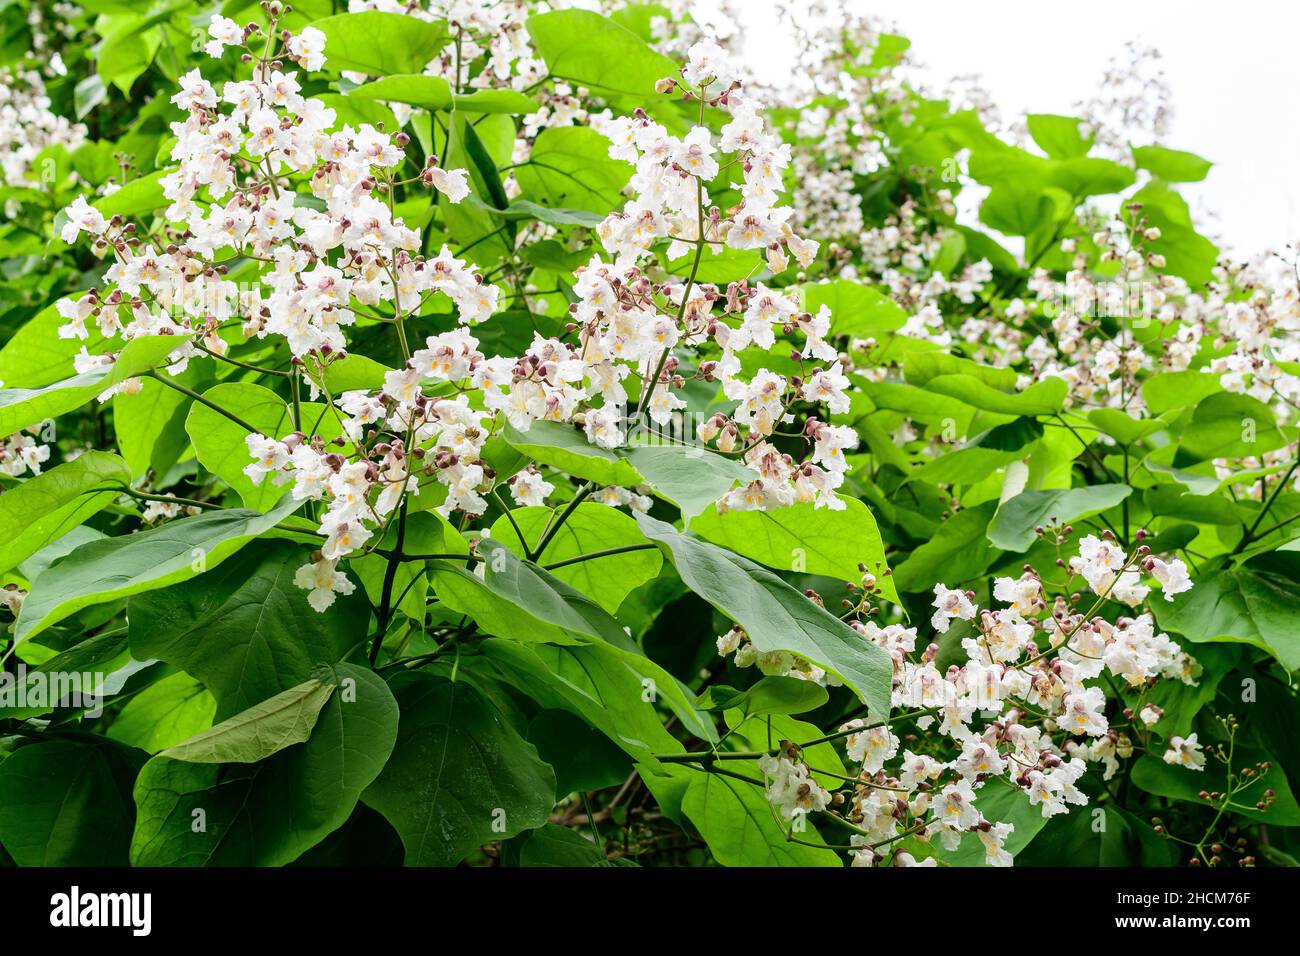 Large branches with decorative white flowers and green leaves of Catalpa bignonioides plant commonly known as southern catalpa, cigartree or Indian be Stock Photo